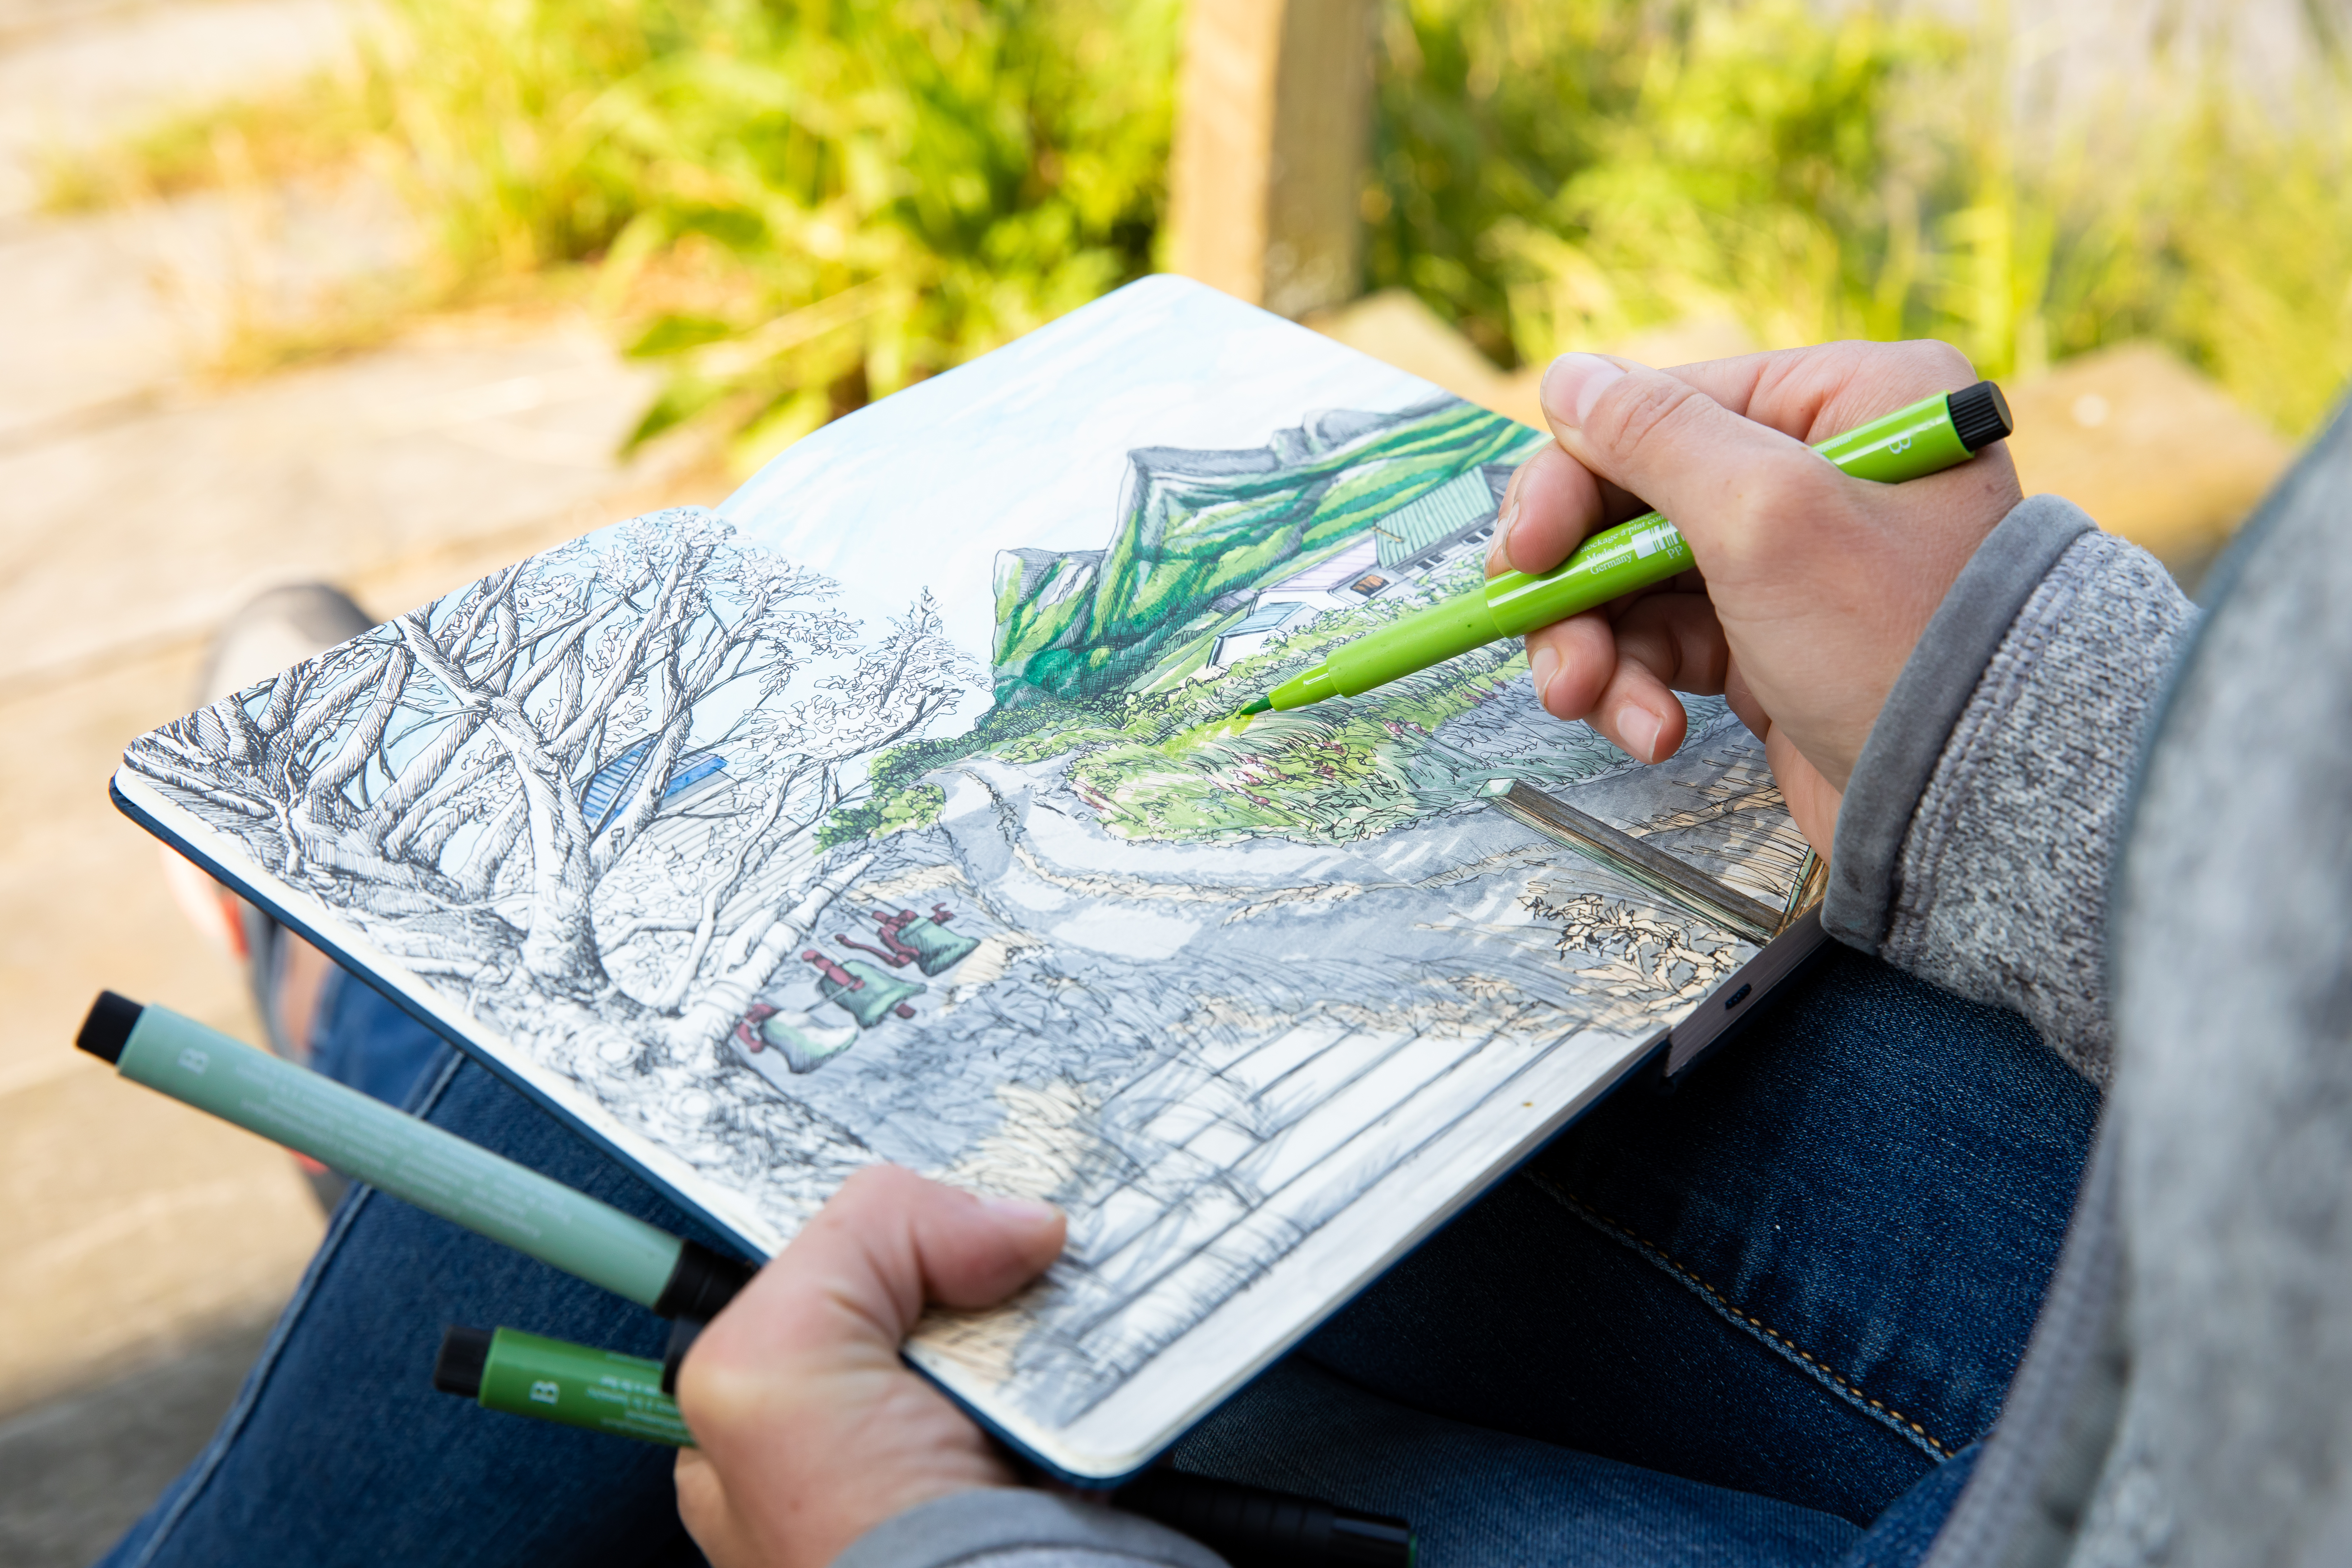 A hand holding a green felt tipped pen coloring in an illustration in a sketchbook of a mountainous scene